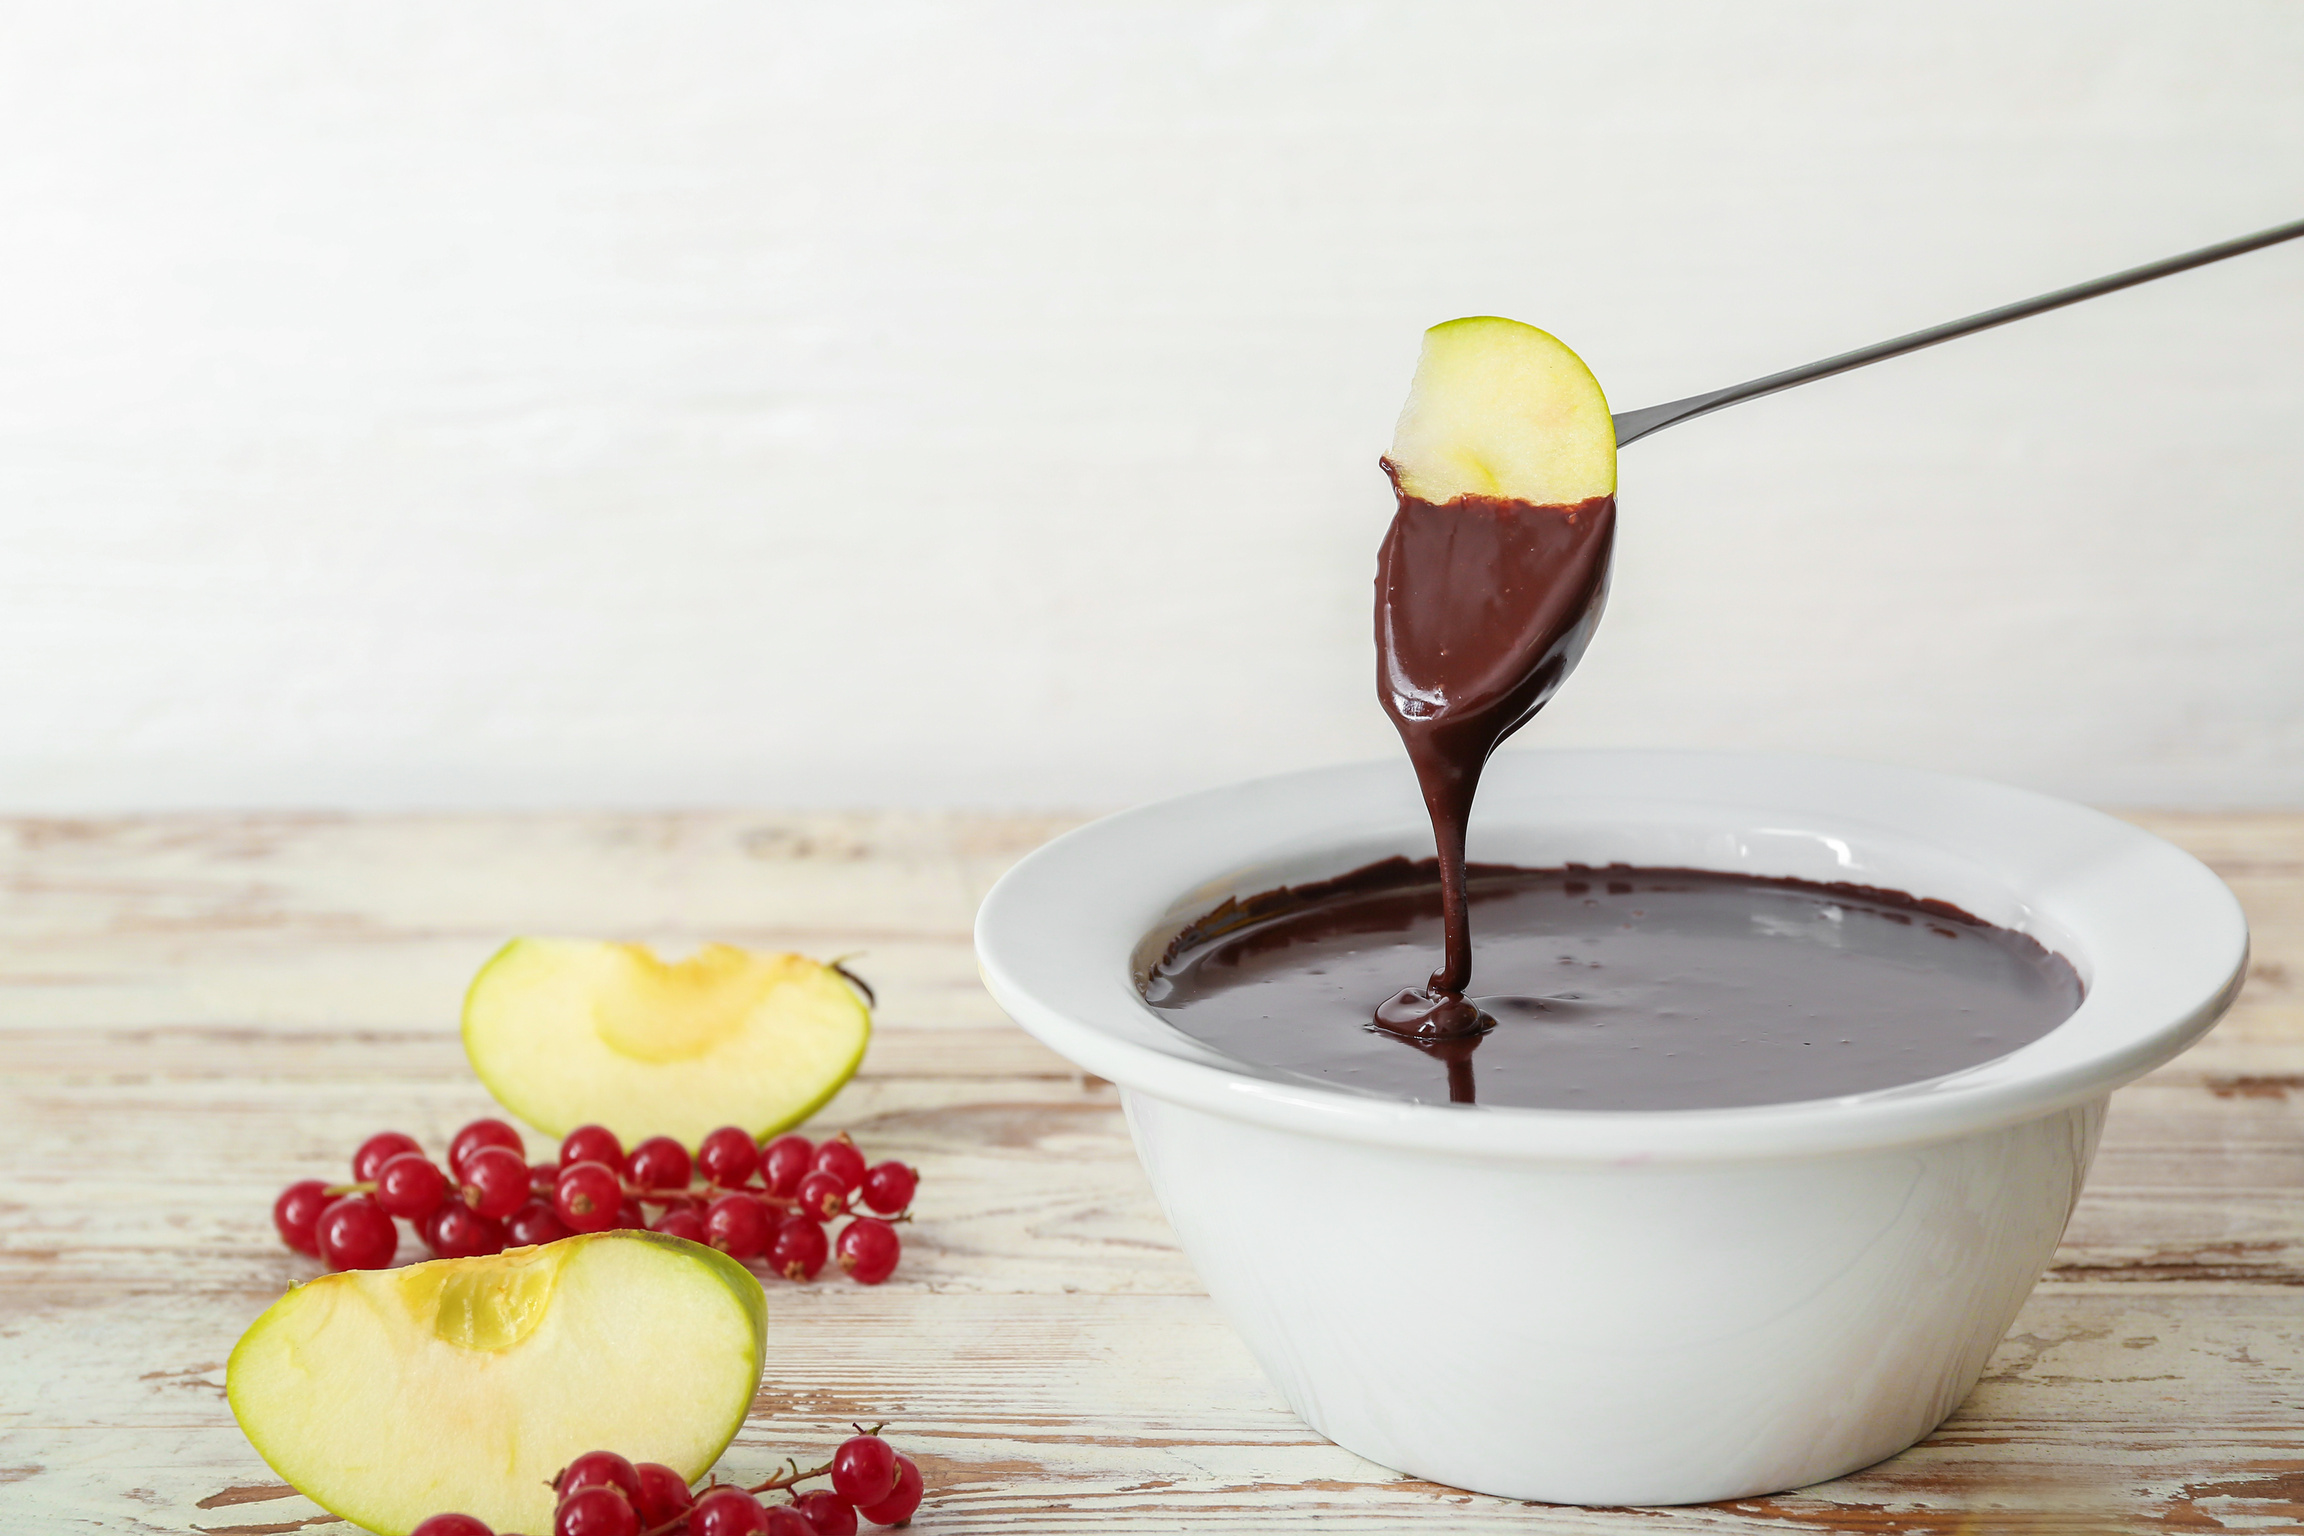 Dipping of Tasty Apple into Bowl with Chocolate Fondue